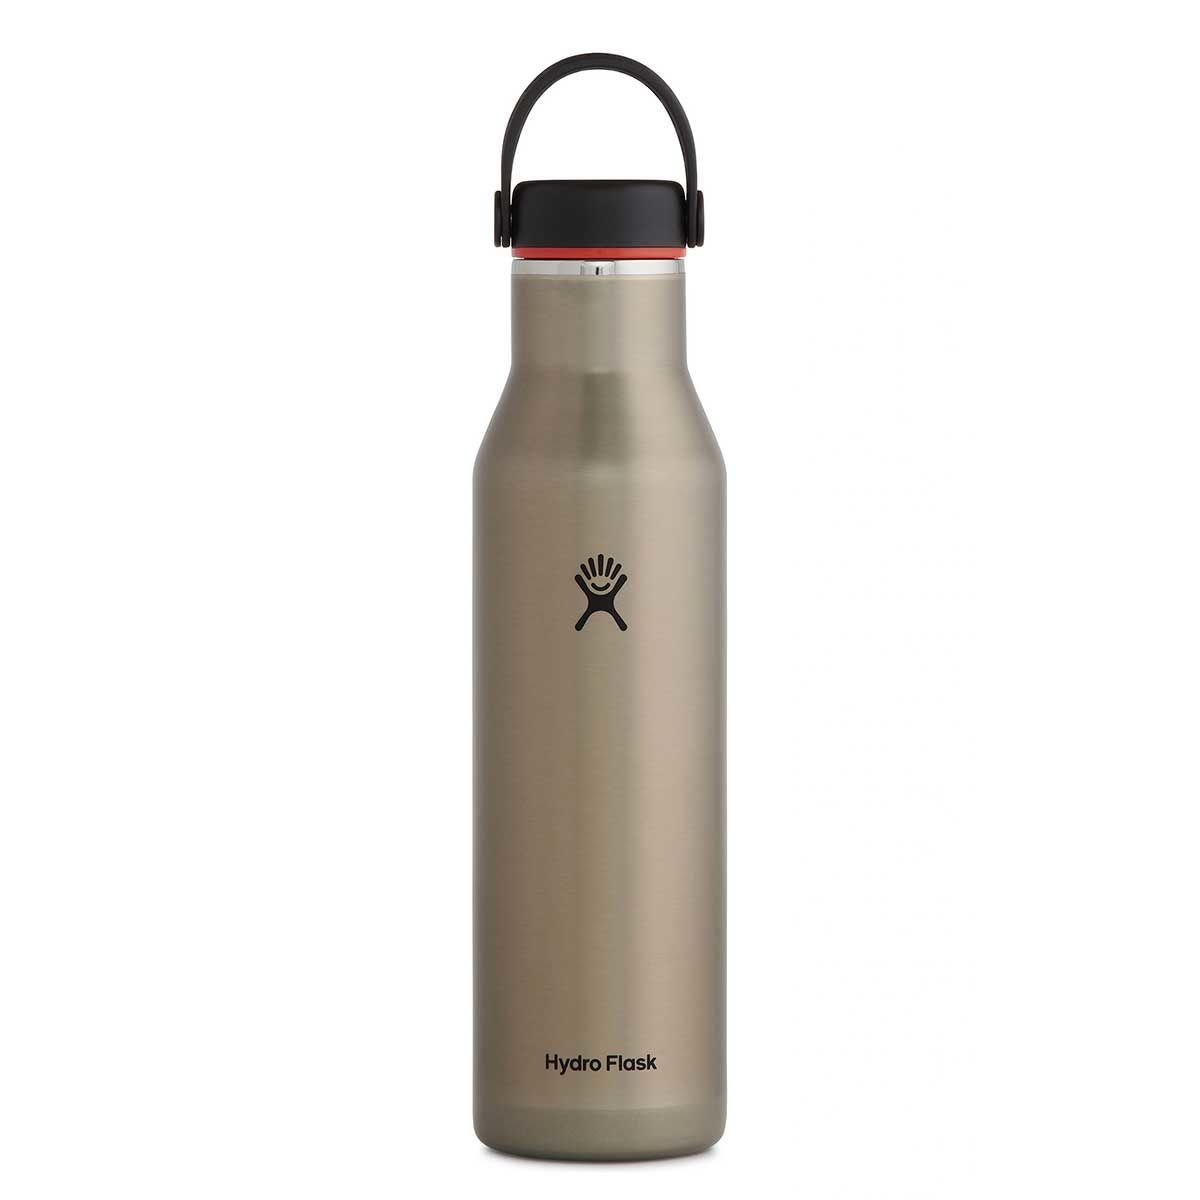 Hydroflask trail series gourde isotherme